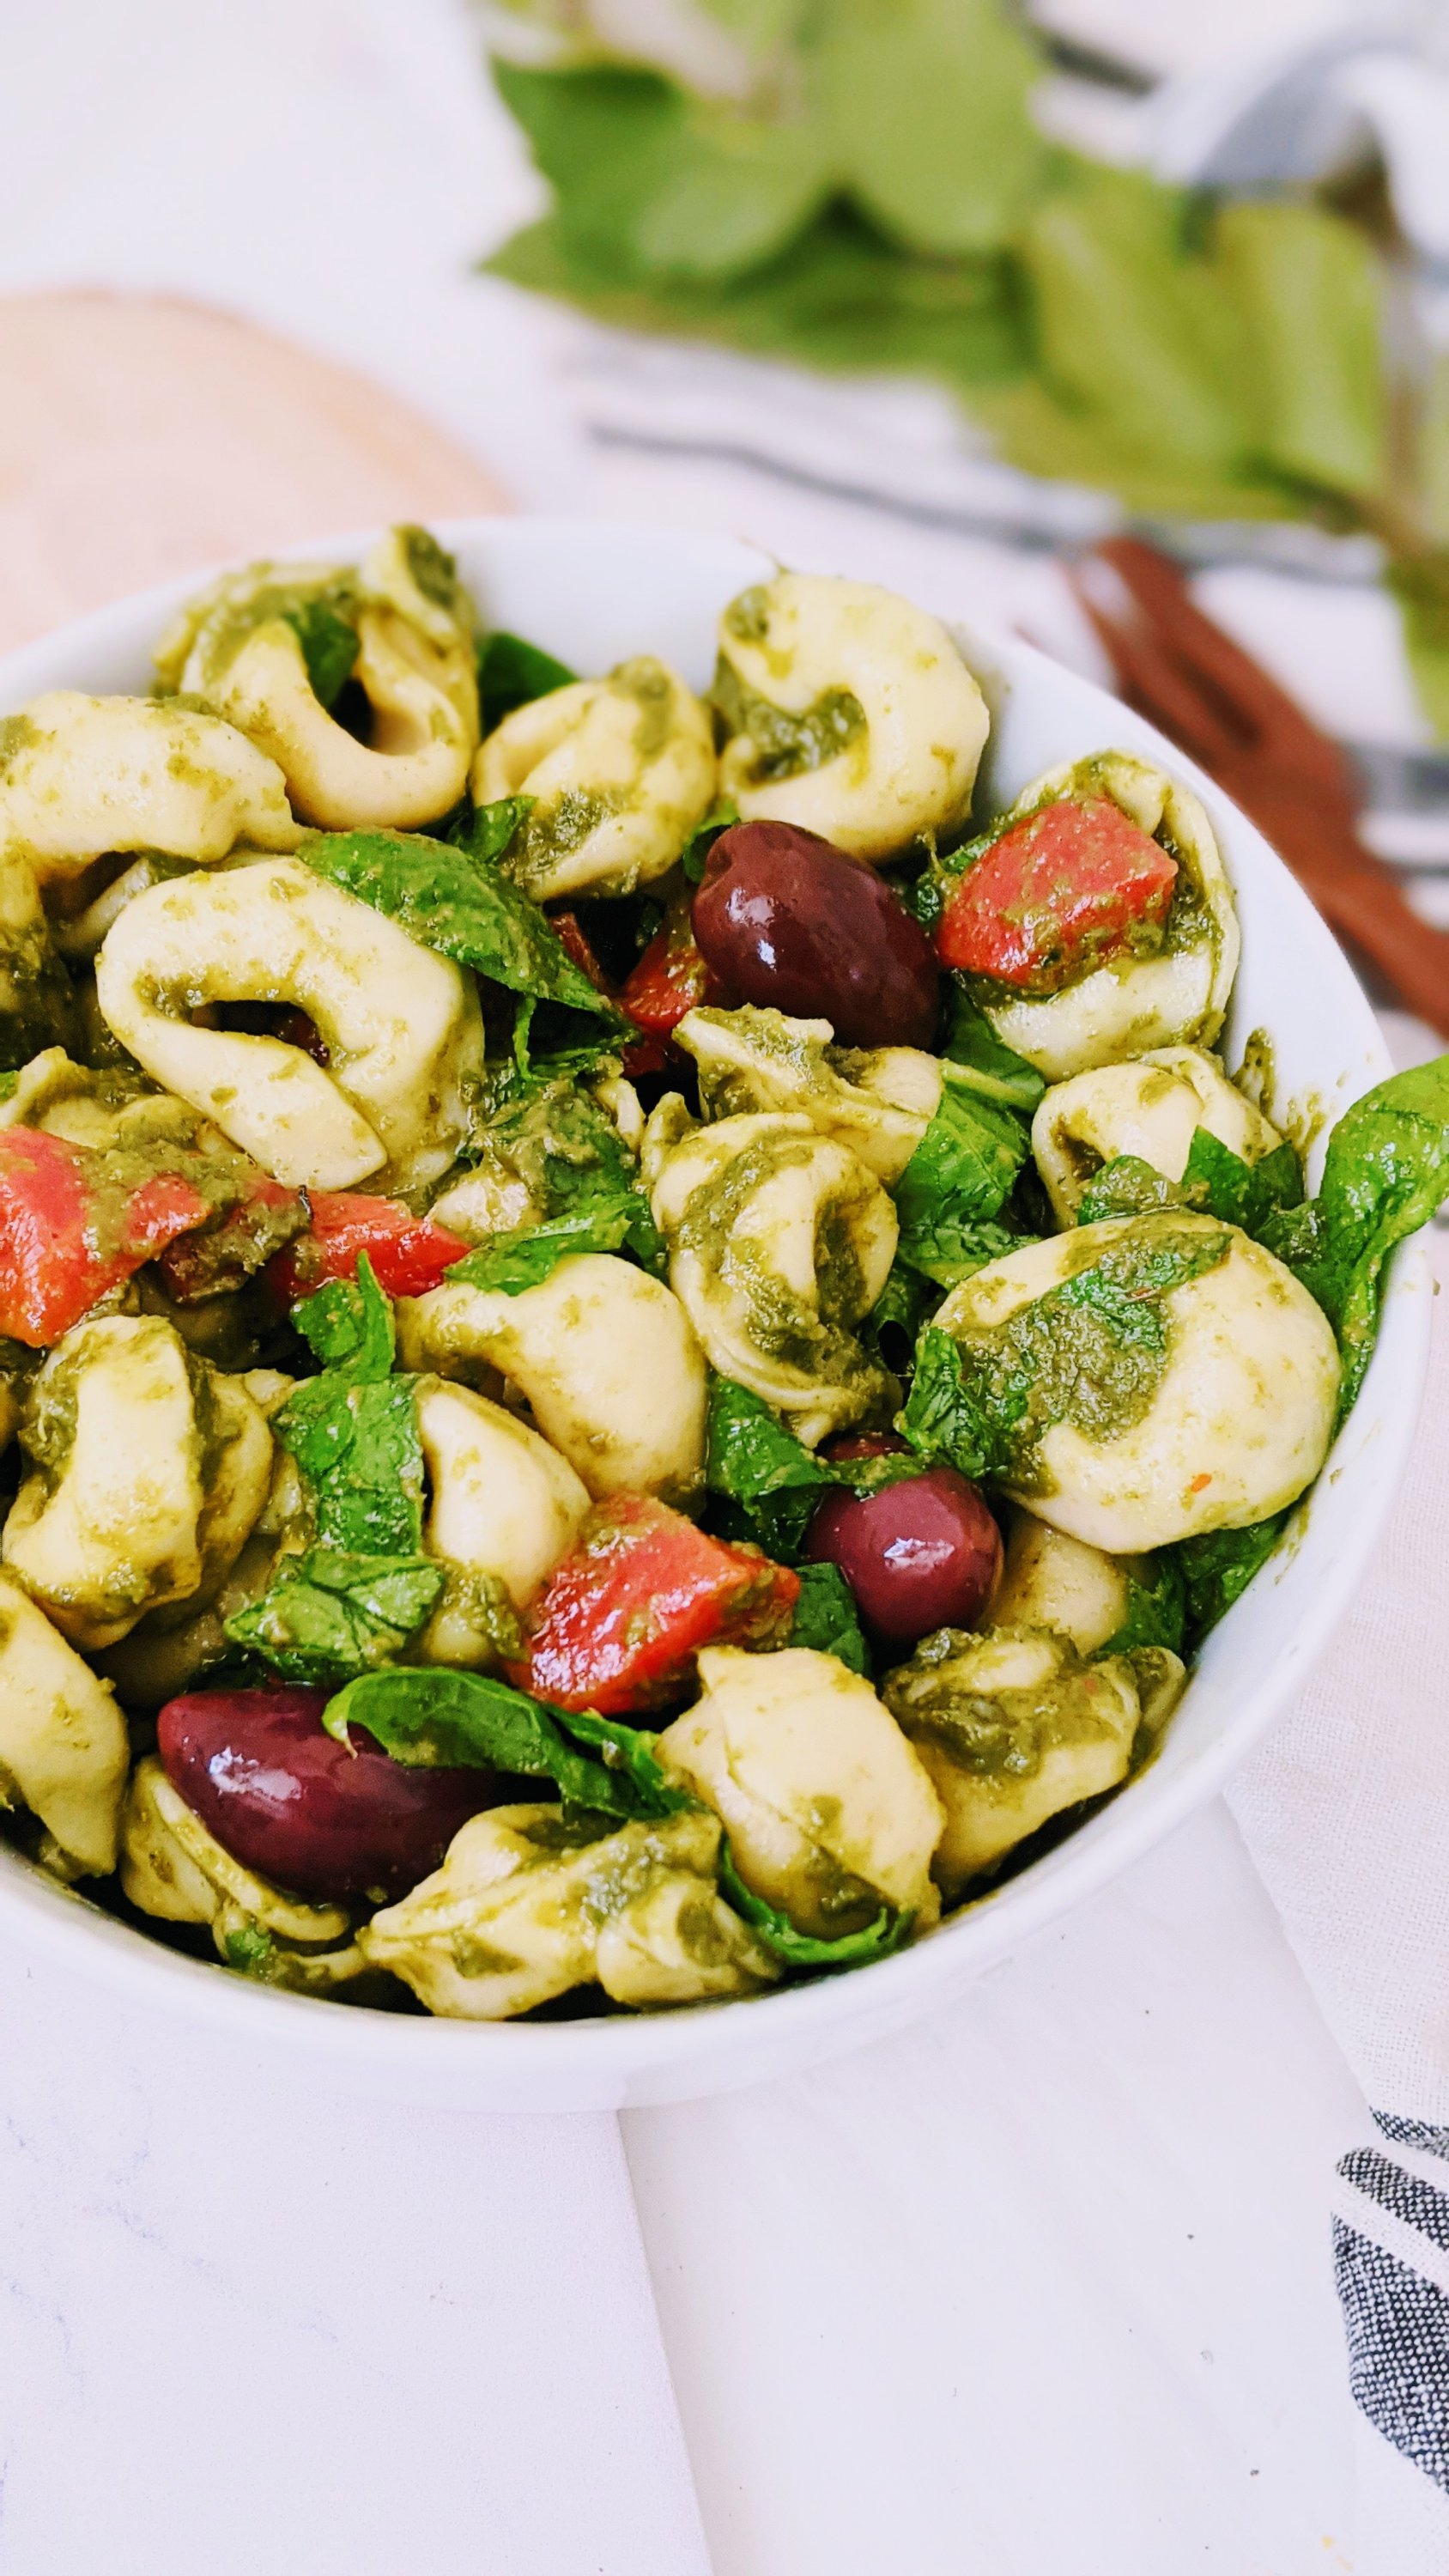 pesto tortellini pasta salad recipe meatless pasta salads for bbqs and entertaining 30 minute summer side dish recipes healthy salads